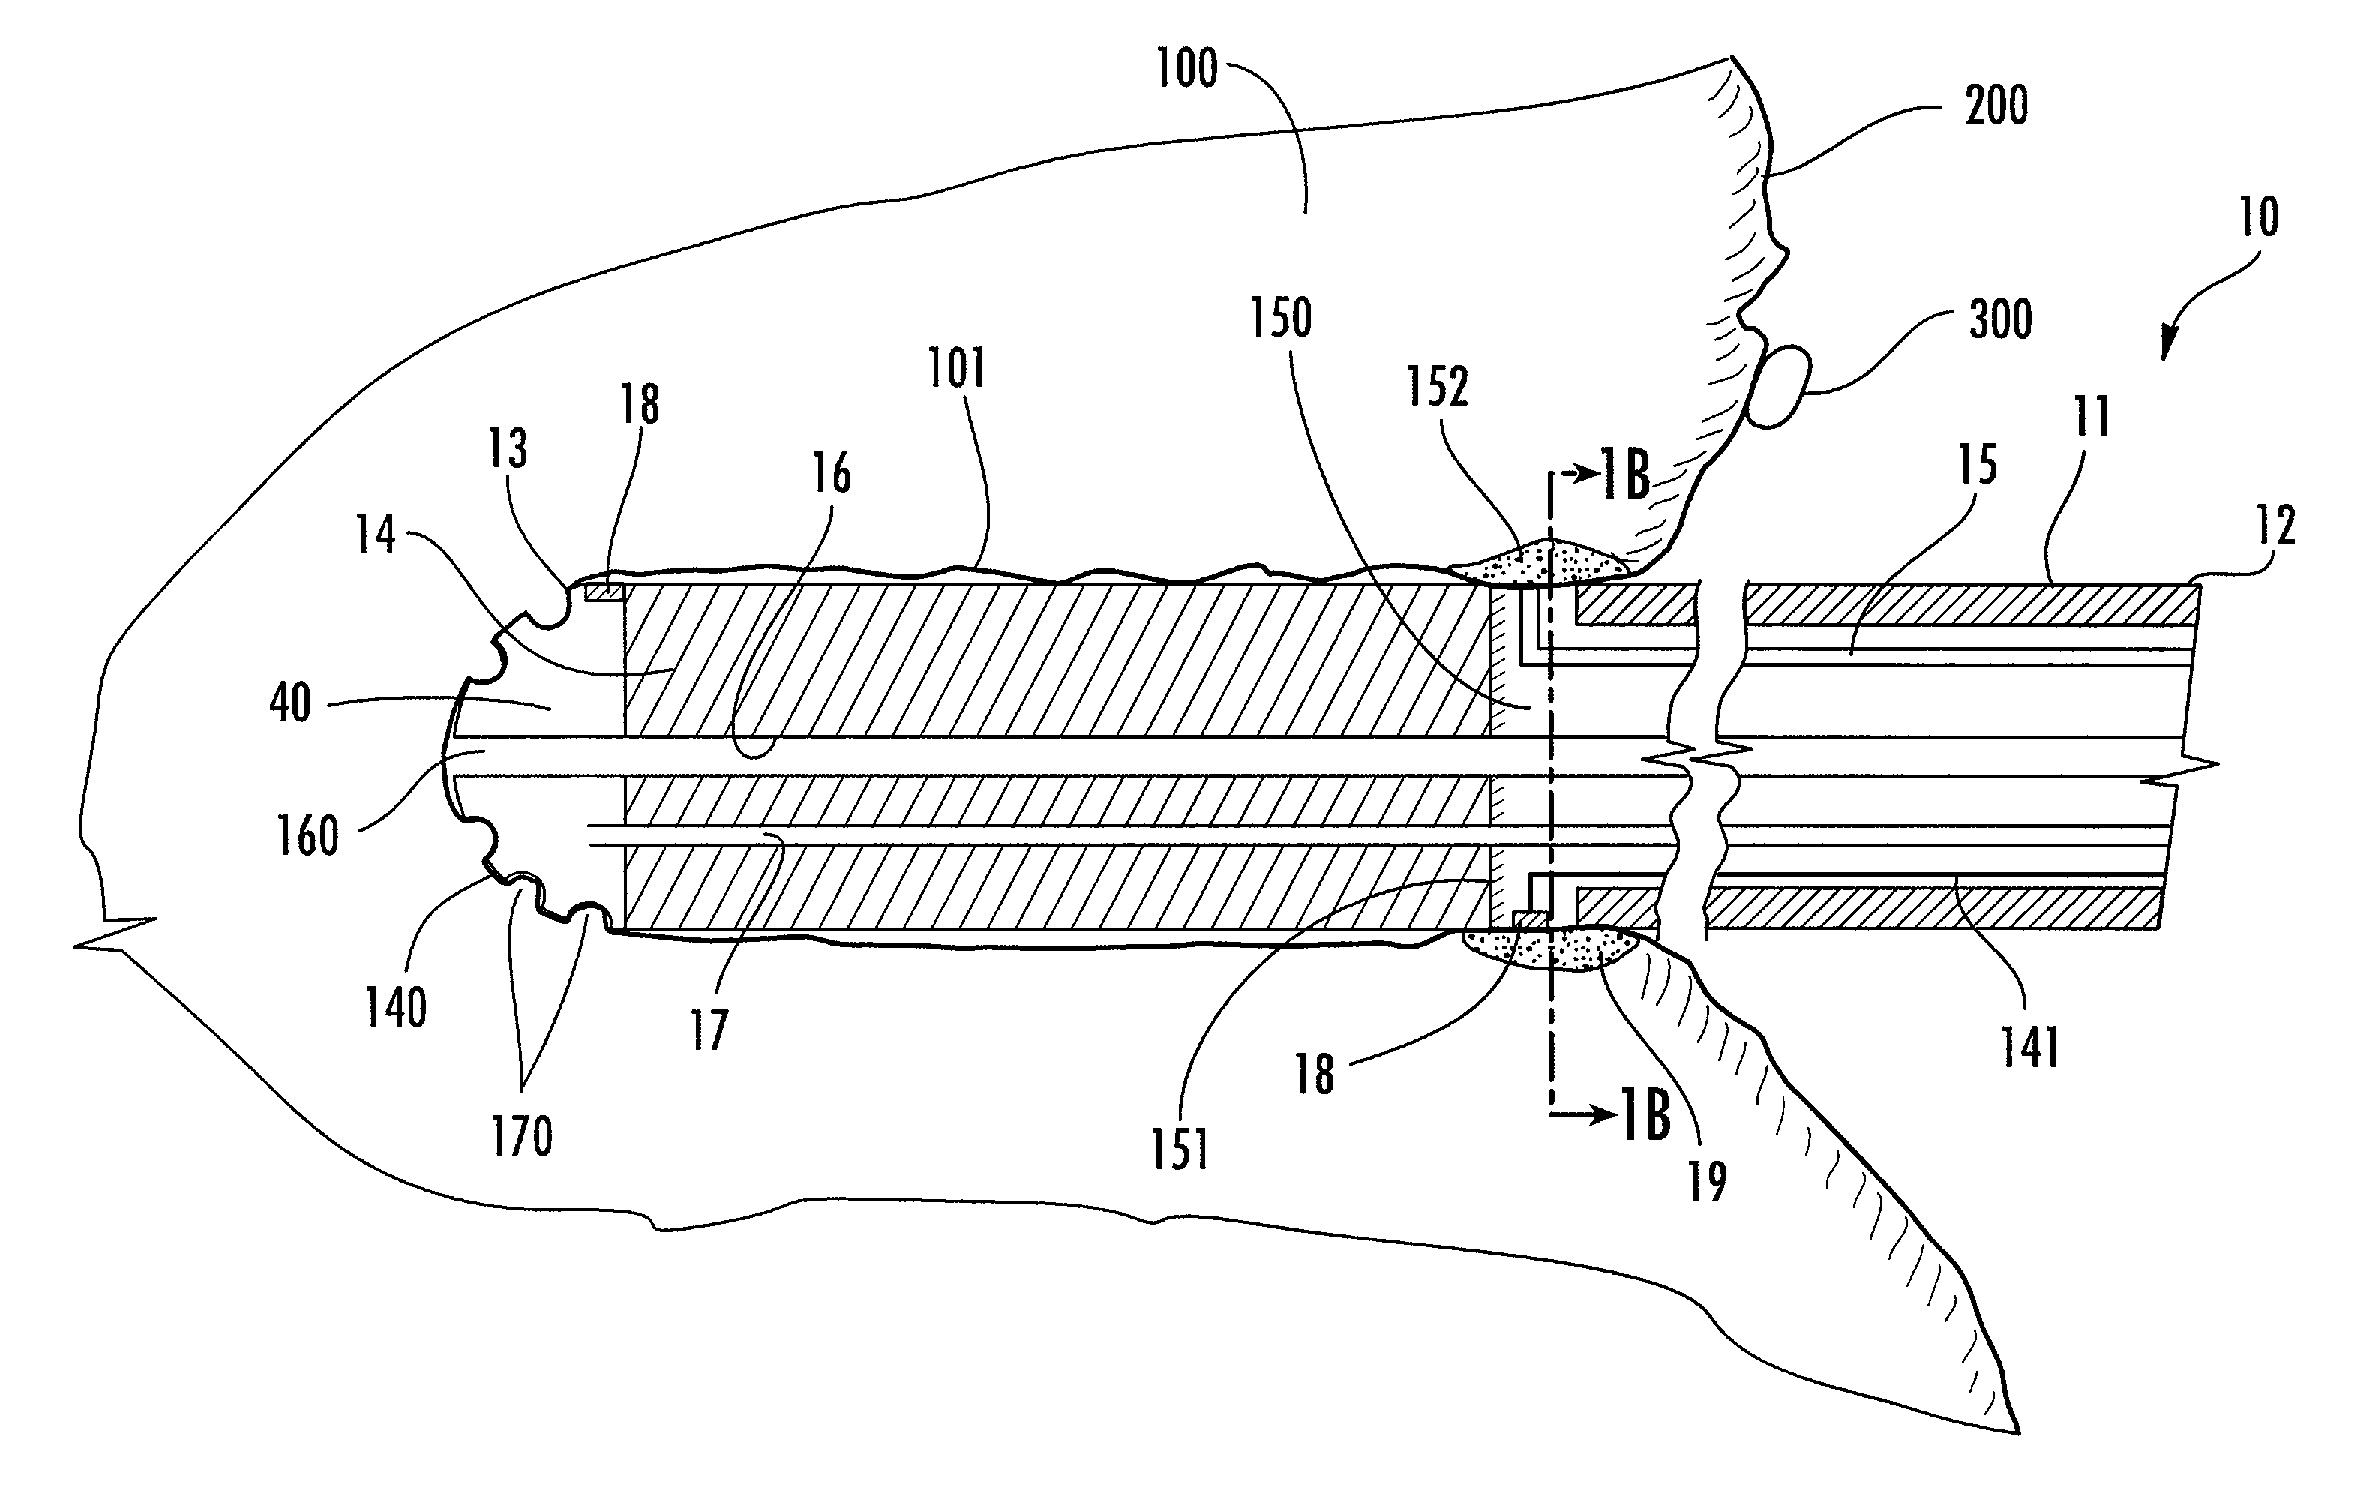 Fluid flowing device and method for tissue diagnosis or therapy